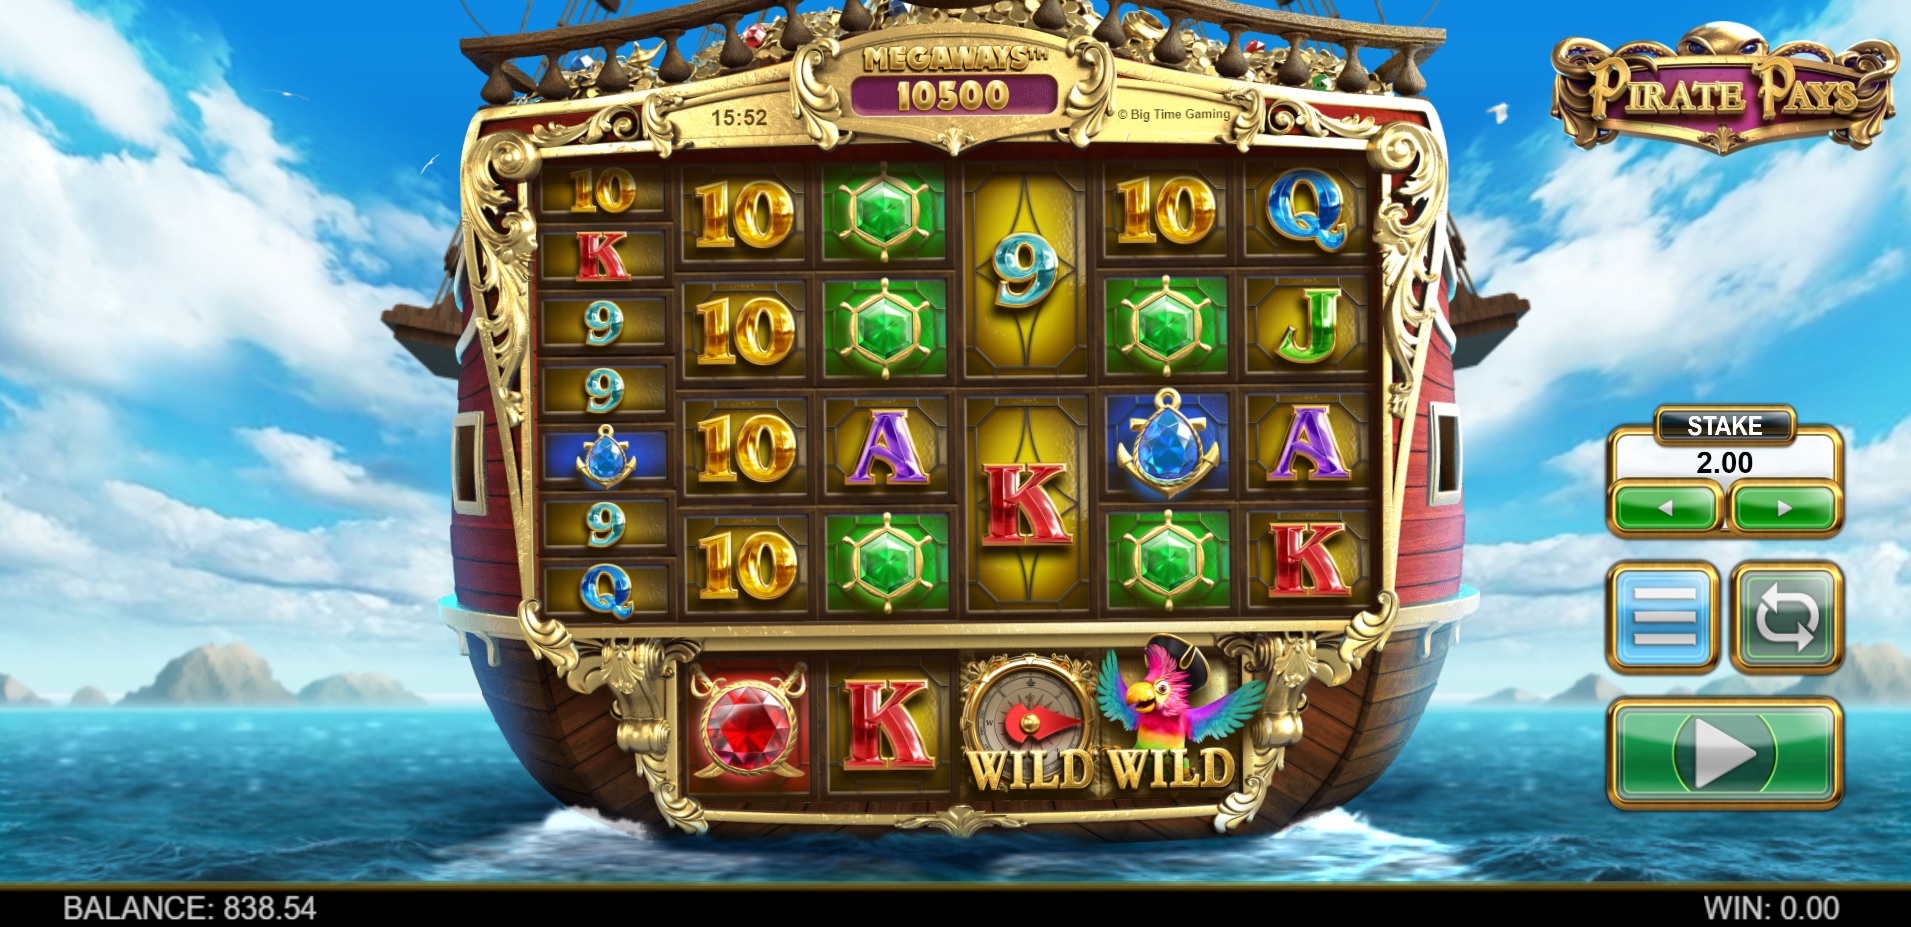 Pirate Pays slot game